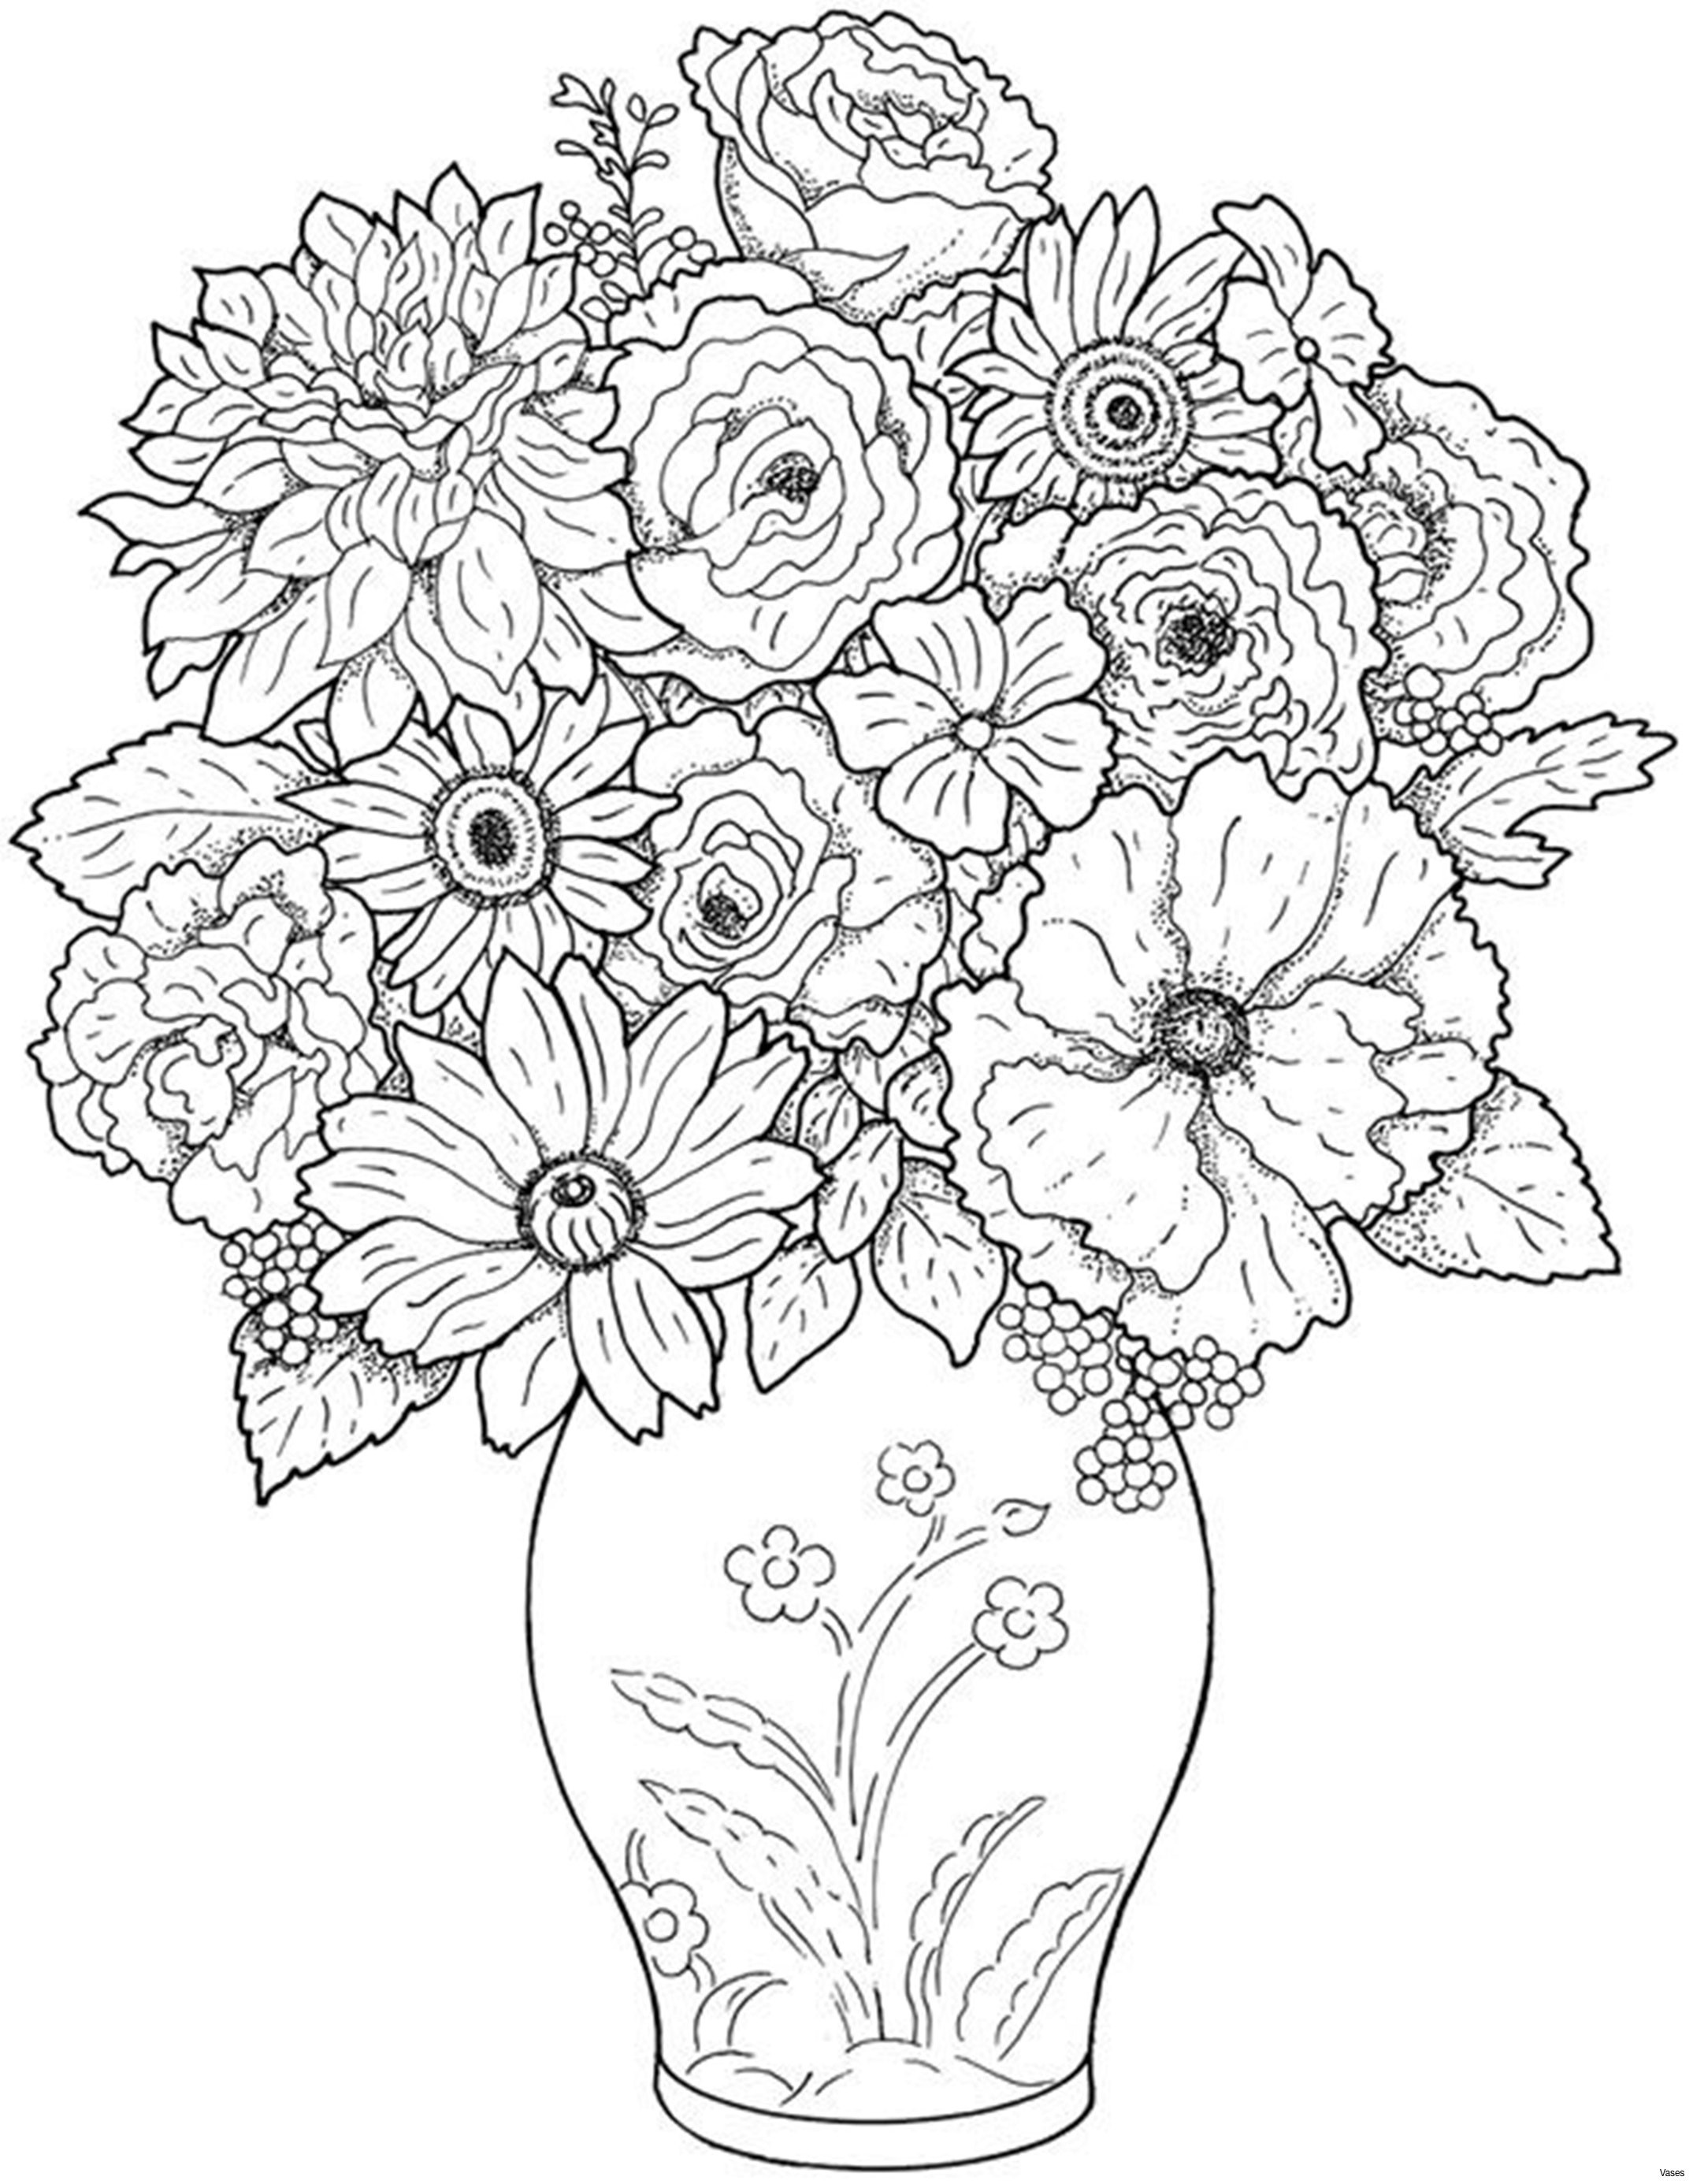 25 Stunning White Glass Flower Vase 2024 free download white glass flower vase of new gray flowers yepigames me in cool vases flower vase coloring page pages flowers in a top i 0d